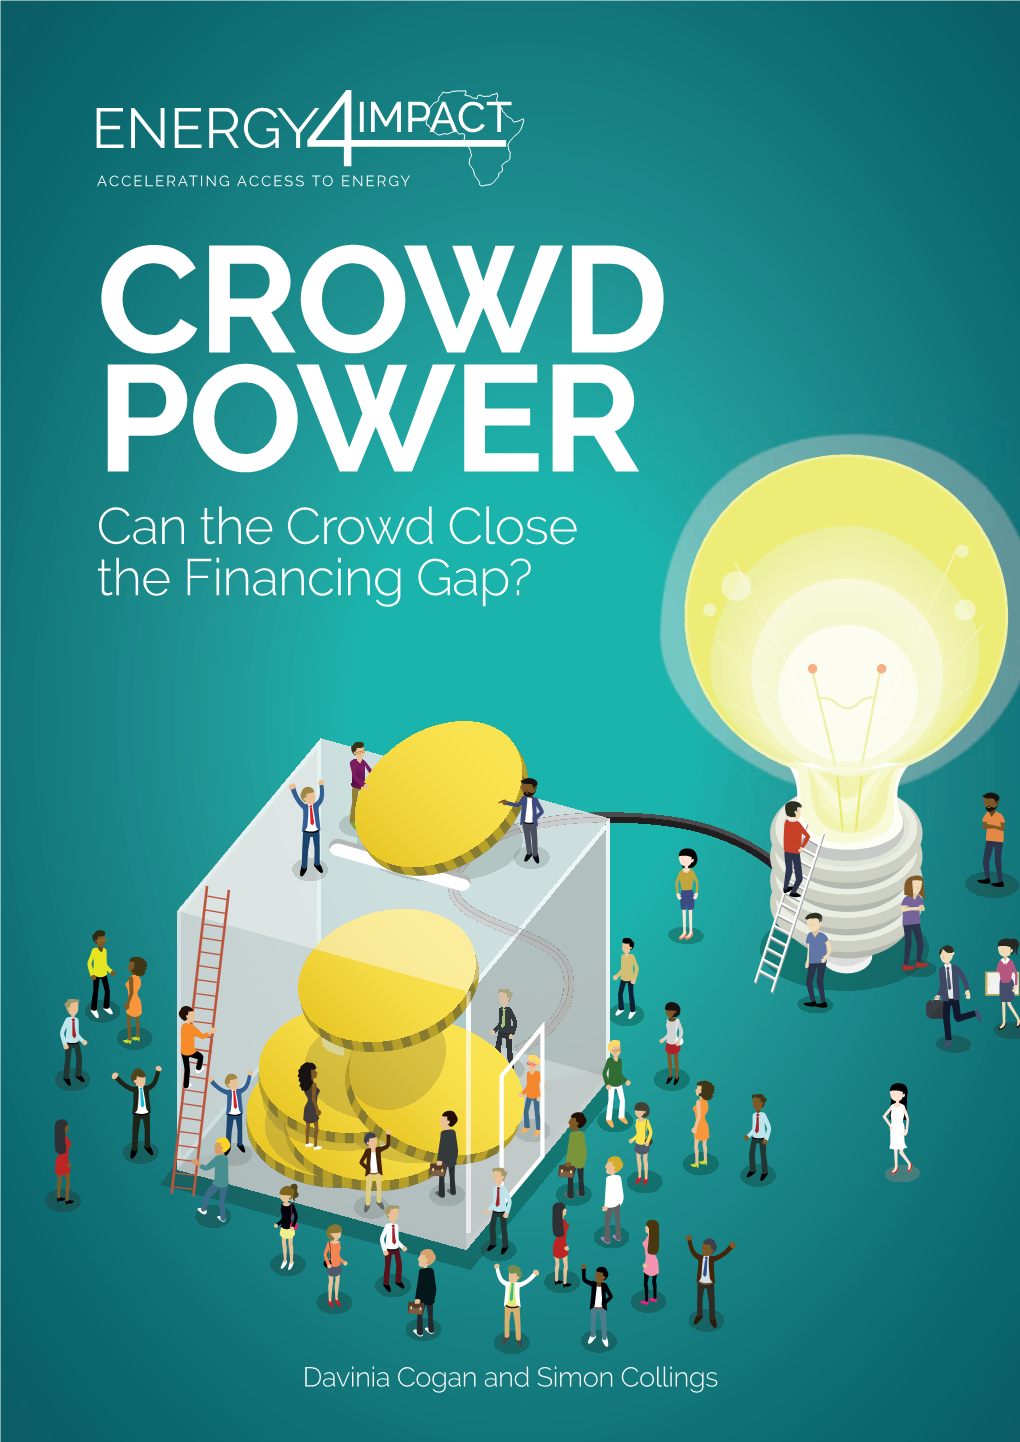 CROWD POWER: Can the Crowd Close the Financing Gap